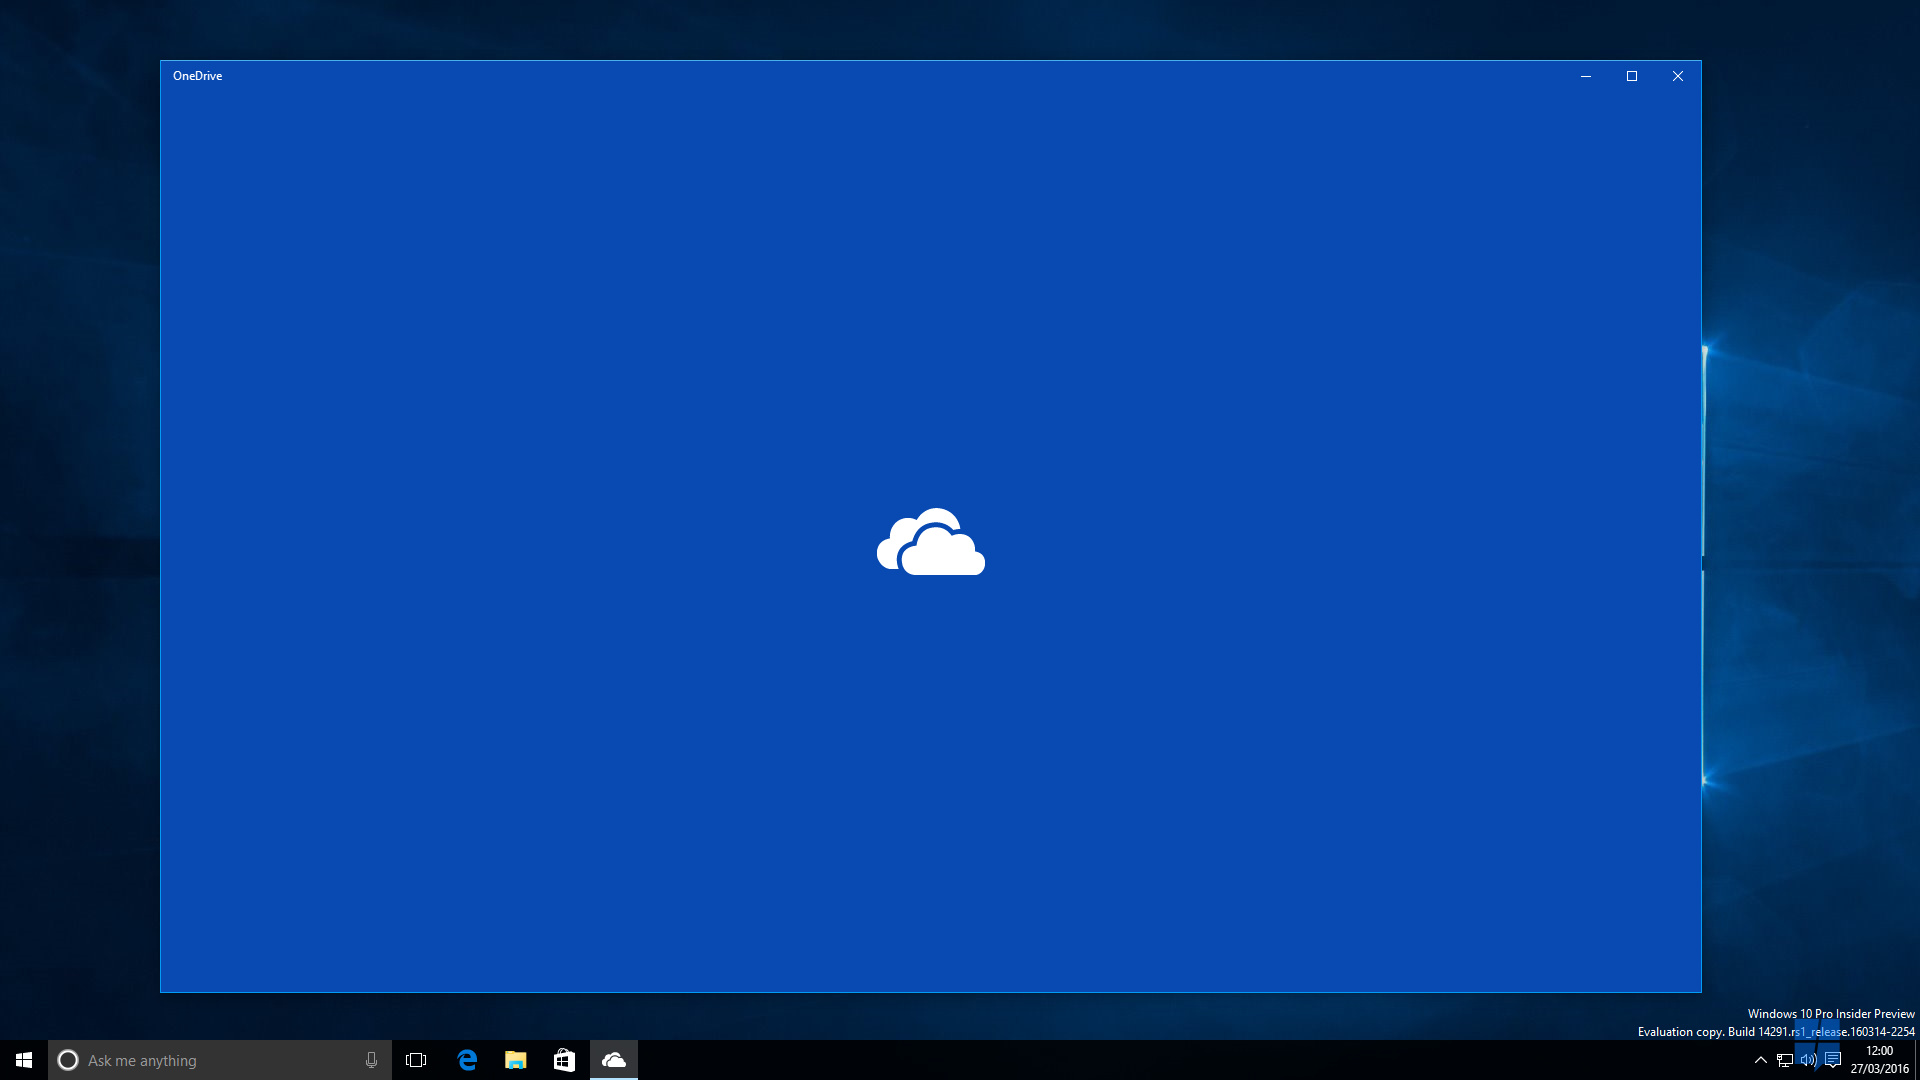 Video: A quick look at OneDrive in Windows 10 for PCs